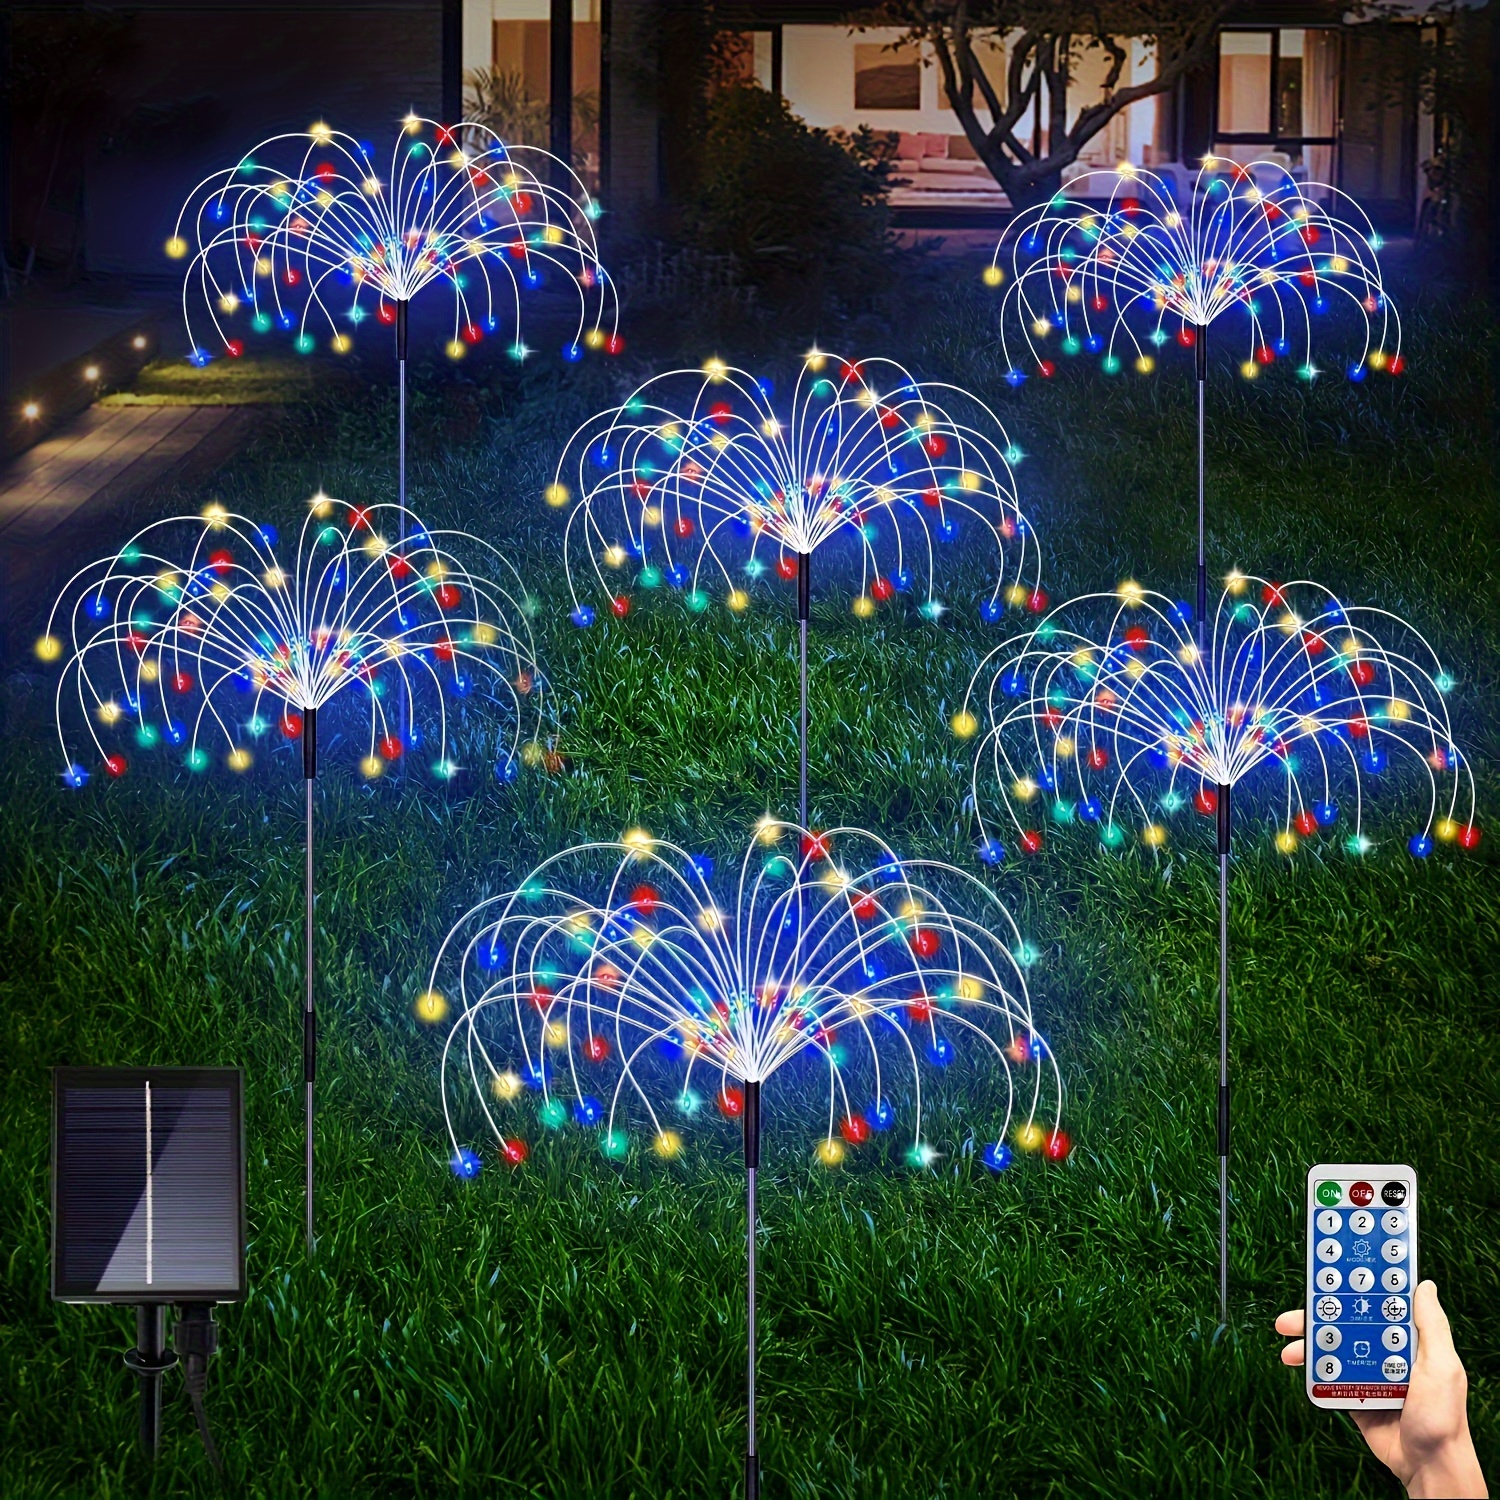 

Fireworks Solar Lights Outdoor 6 Pack 720 Led Pathway Lights Solar Powered Starburst Fairy Lights 8 Lighting Modes With Remote Control For Patio Christmas Yard Decorative